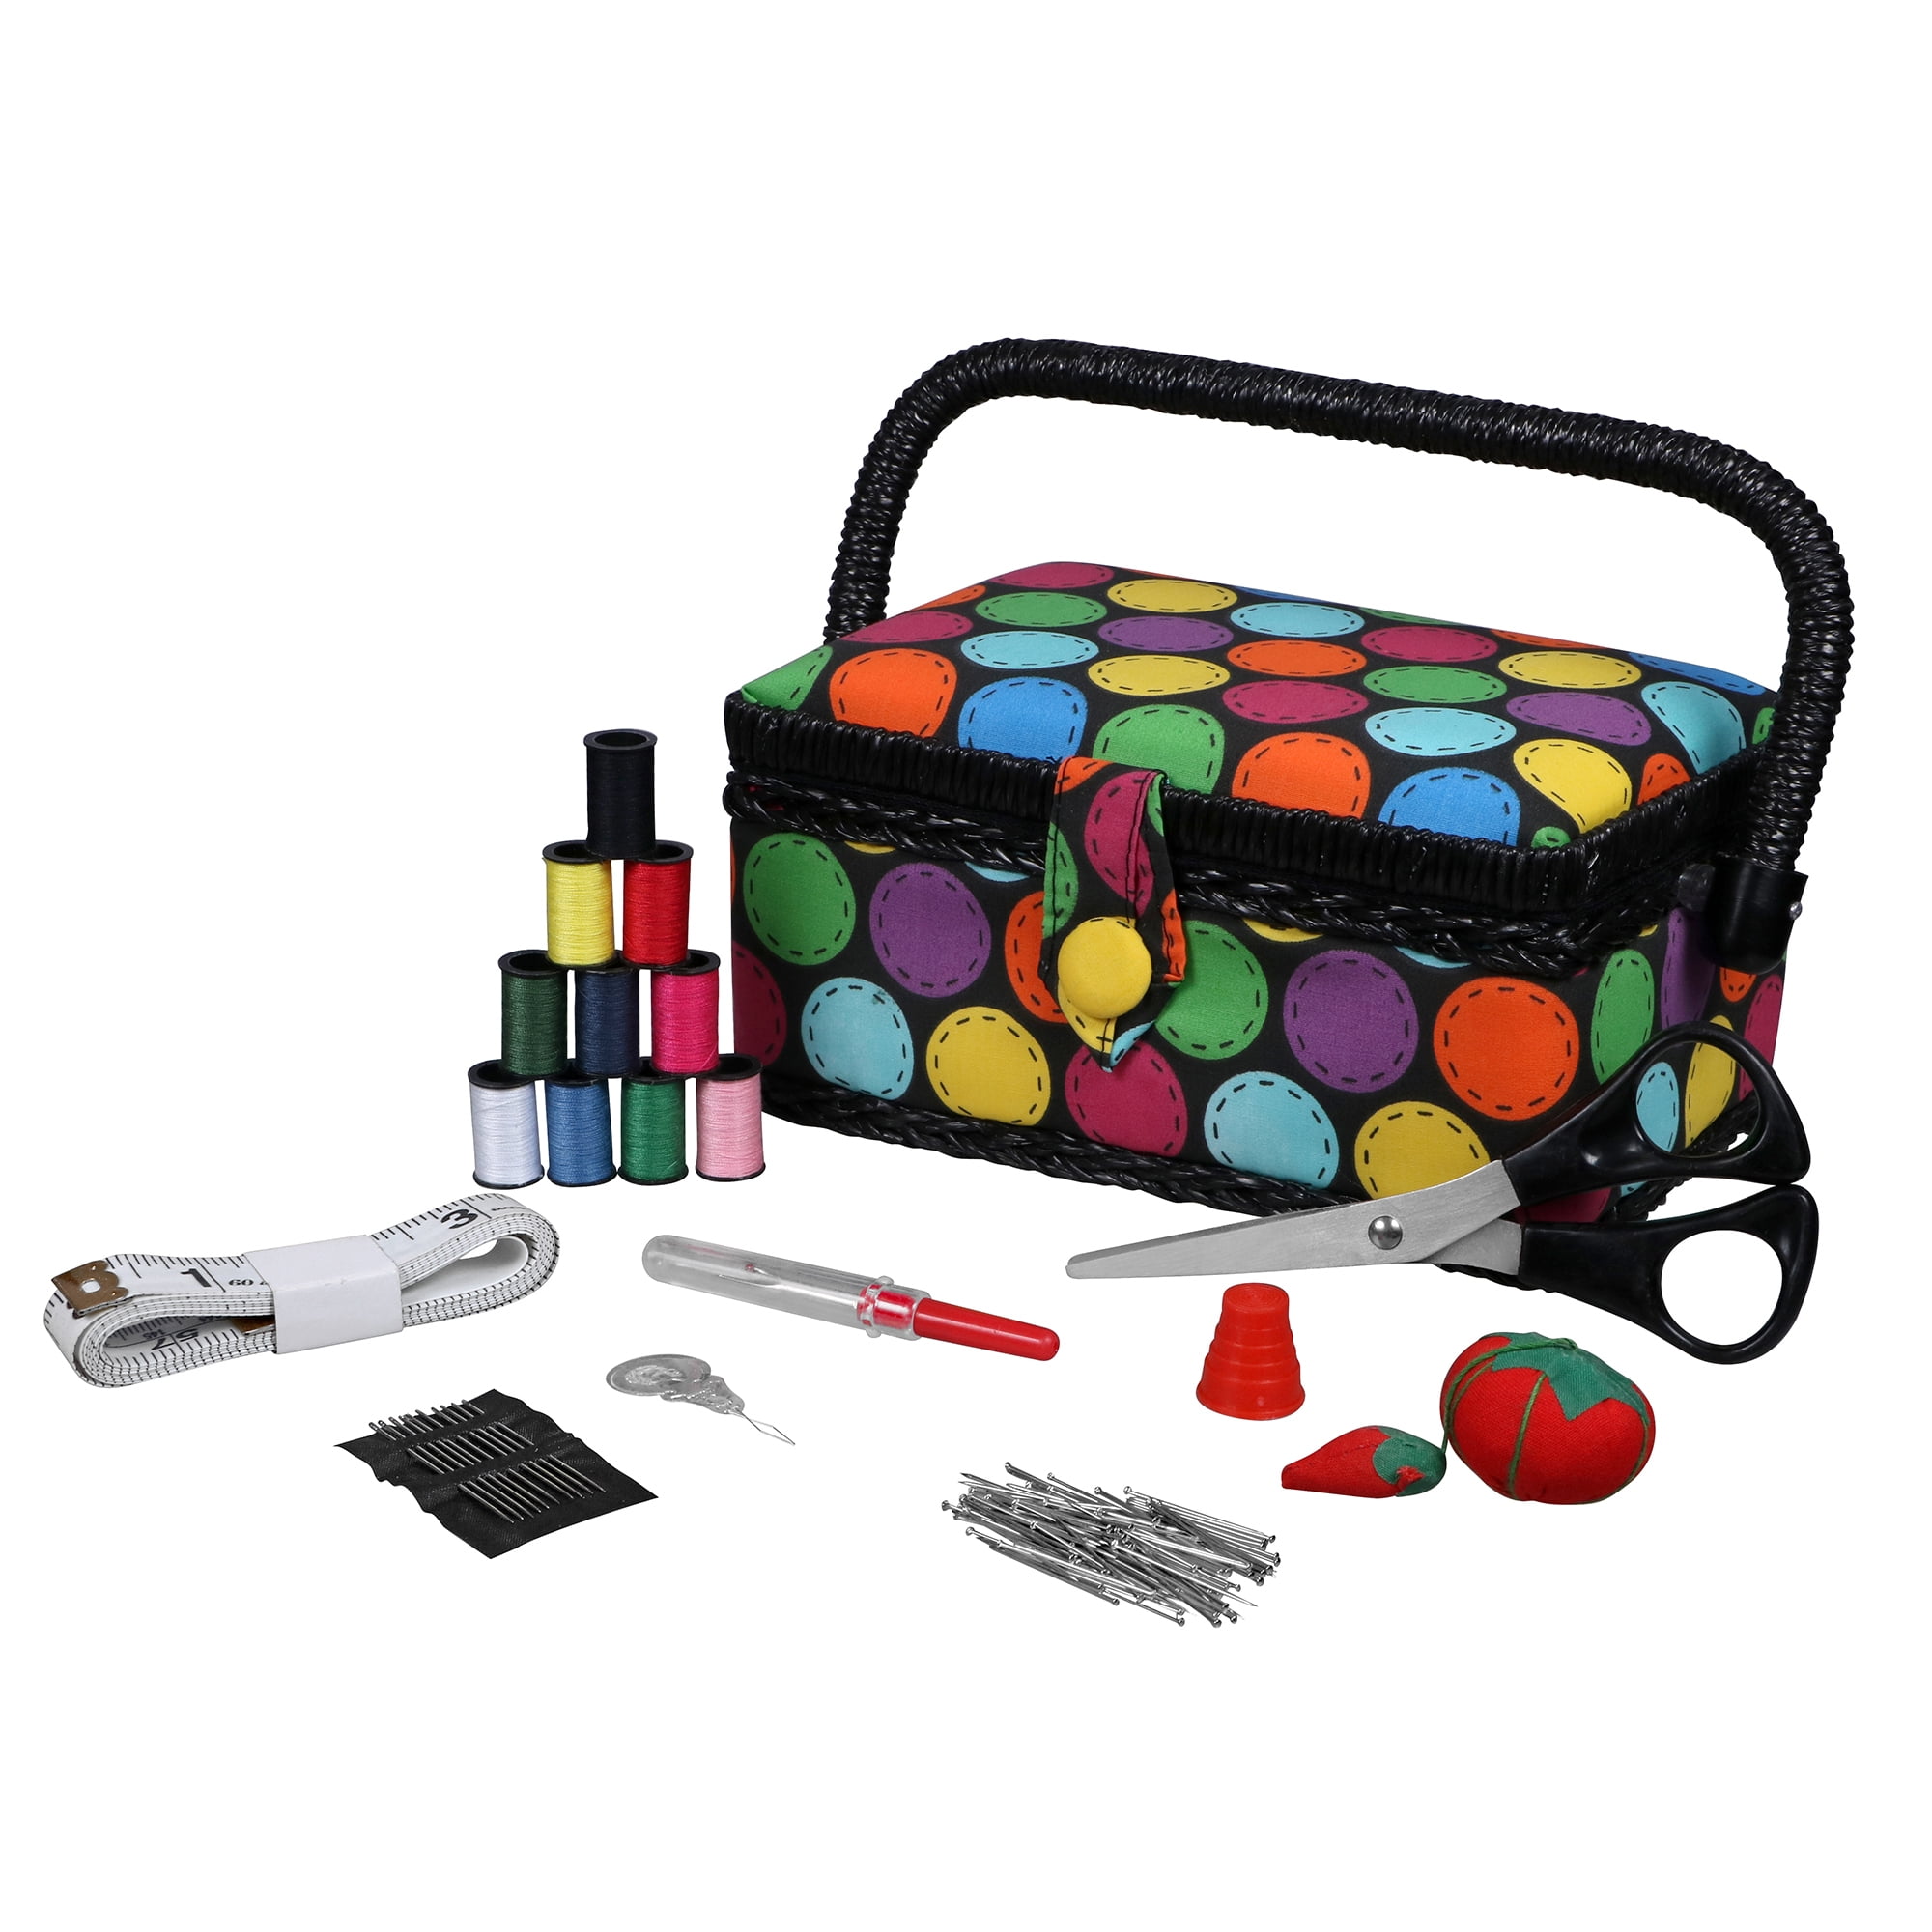 SINGER Small Sewing Basket Multi Bright Dots Print, Sewing Kit Storage and  Organizer, Multicolor 